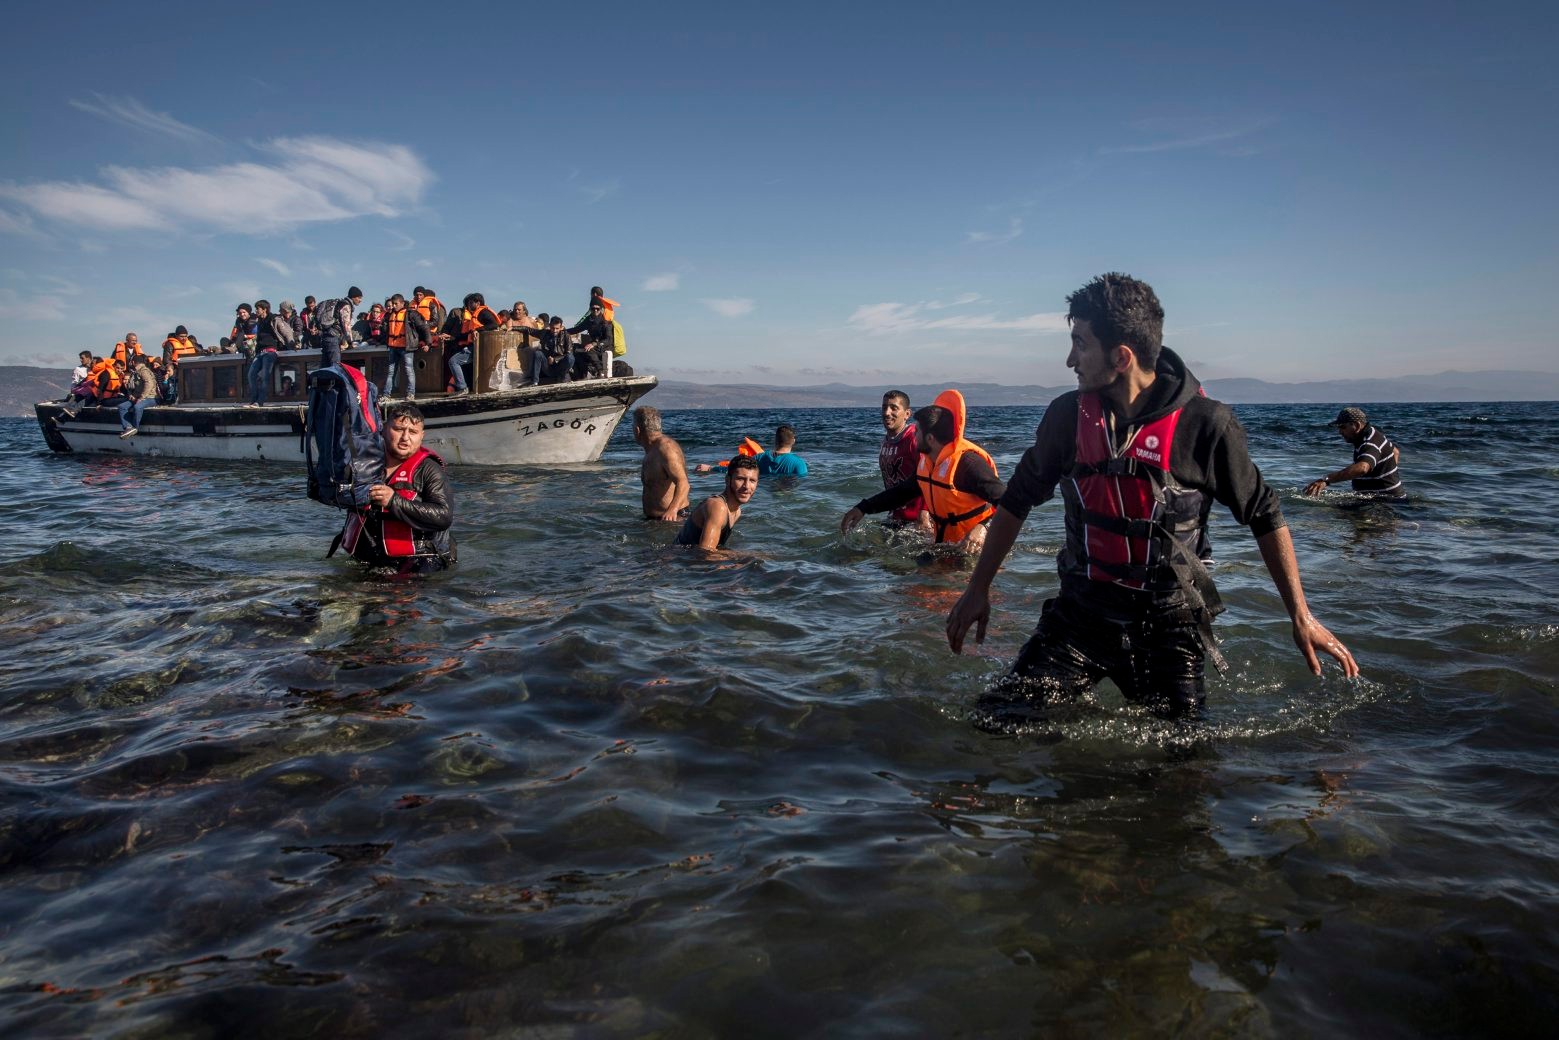 Refugees from Syria and Iraq disembark on the Greek island of Lesbos after arriving with other 120 people on a wooden boat from the Turkish coast, Monday, Oct. 26, 2015. Greeces government says it is preparing a rent-assistance program to cope with a growing number of refugees, who face the oncoming winter and mounting resistance in Europe.(AP Photo/Santi Palacios) Greece Migrants